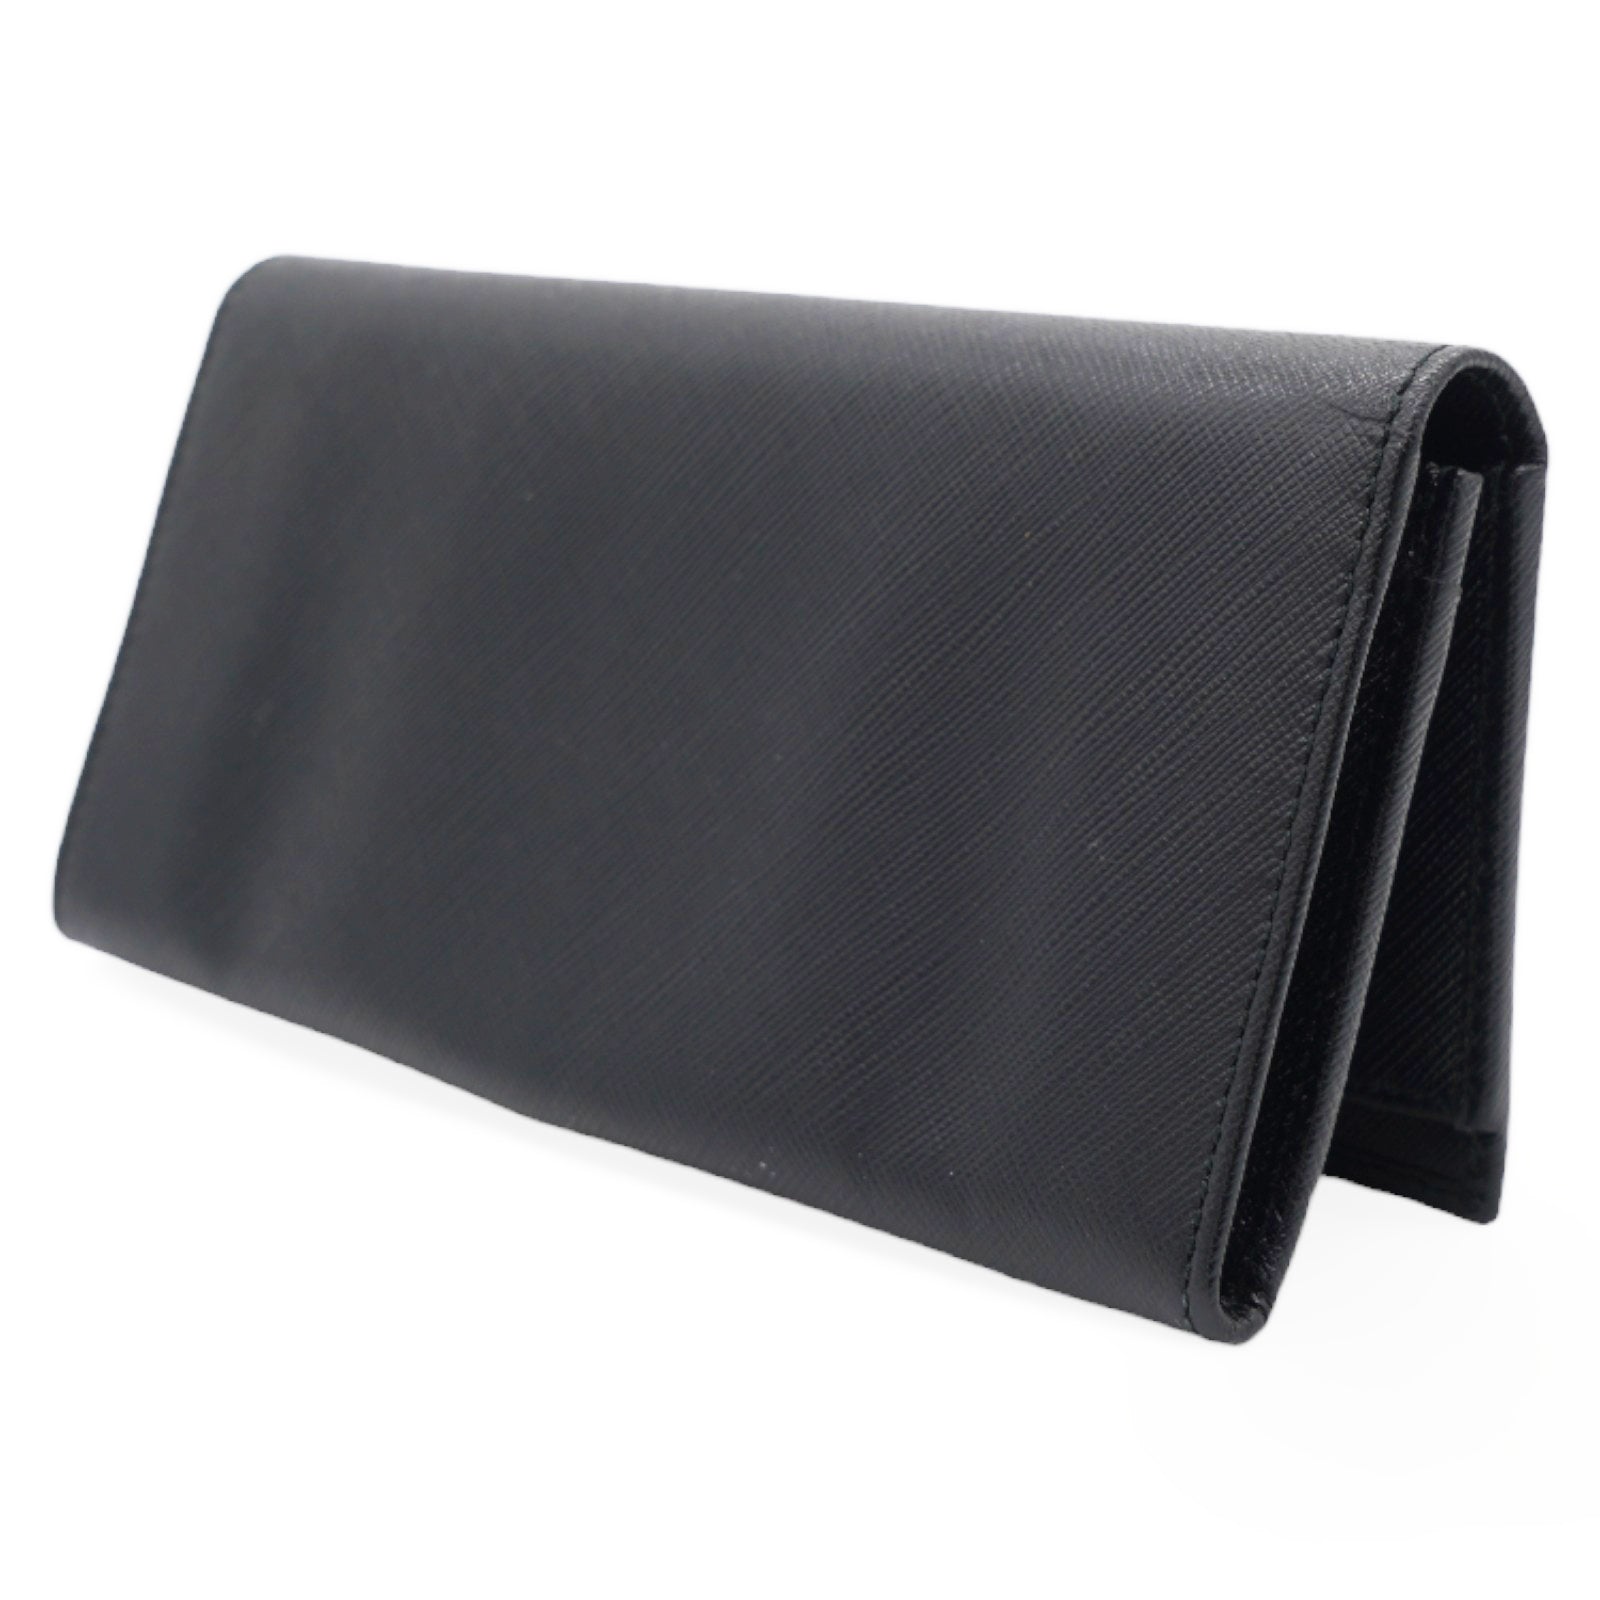 Buy online Black Leatherette Wallet from Wallets and Bags for Men